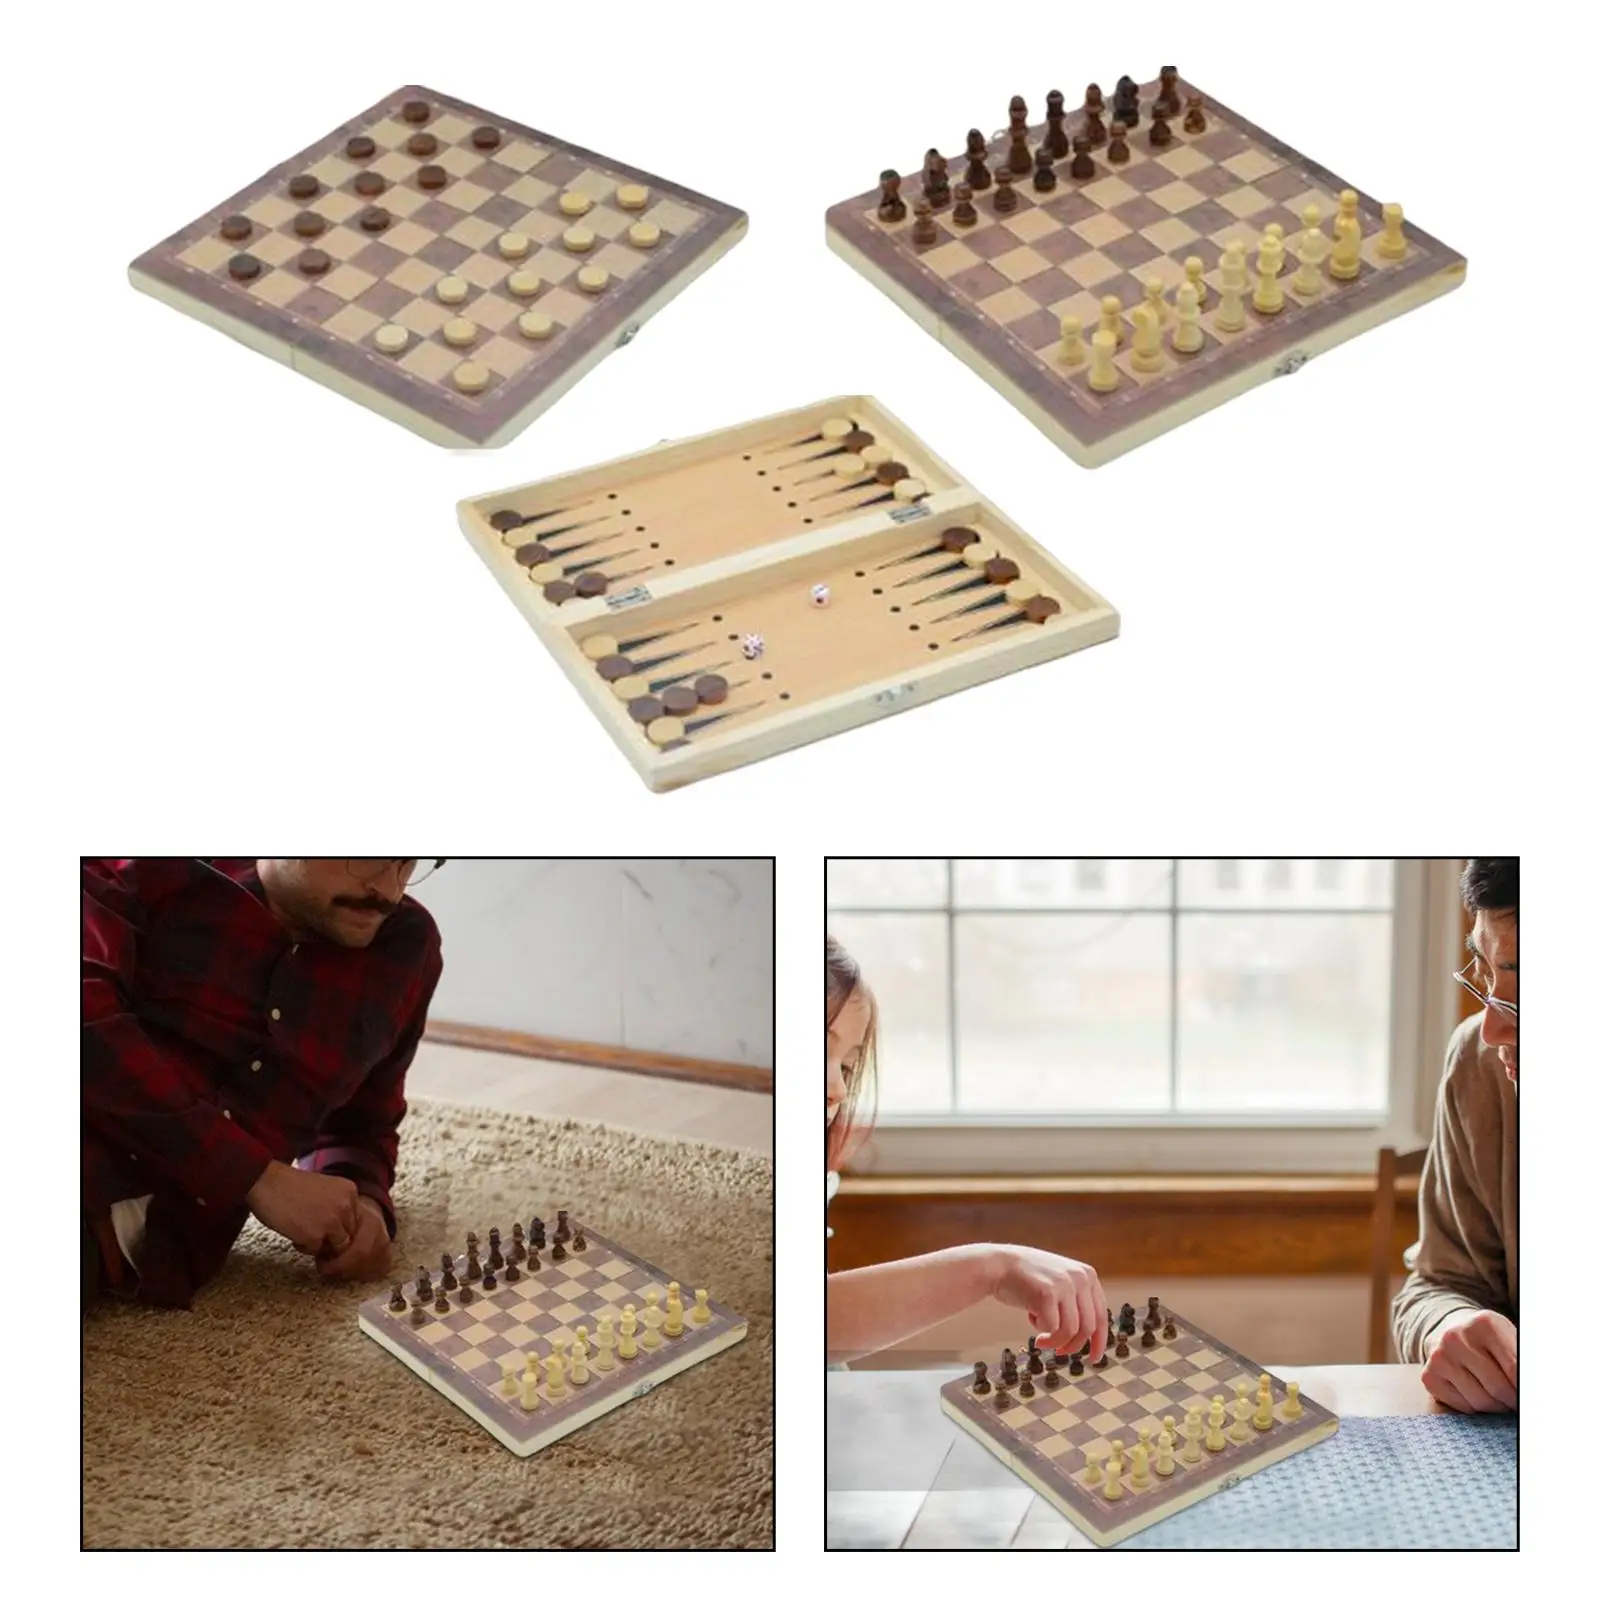 3 in 1 Wooden Chess Set Folding Storage Lightweight Travel Case Portable Board Games for Travel Indoor Home Adults